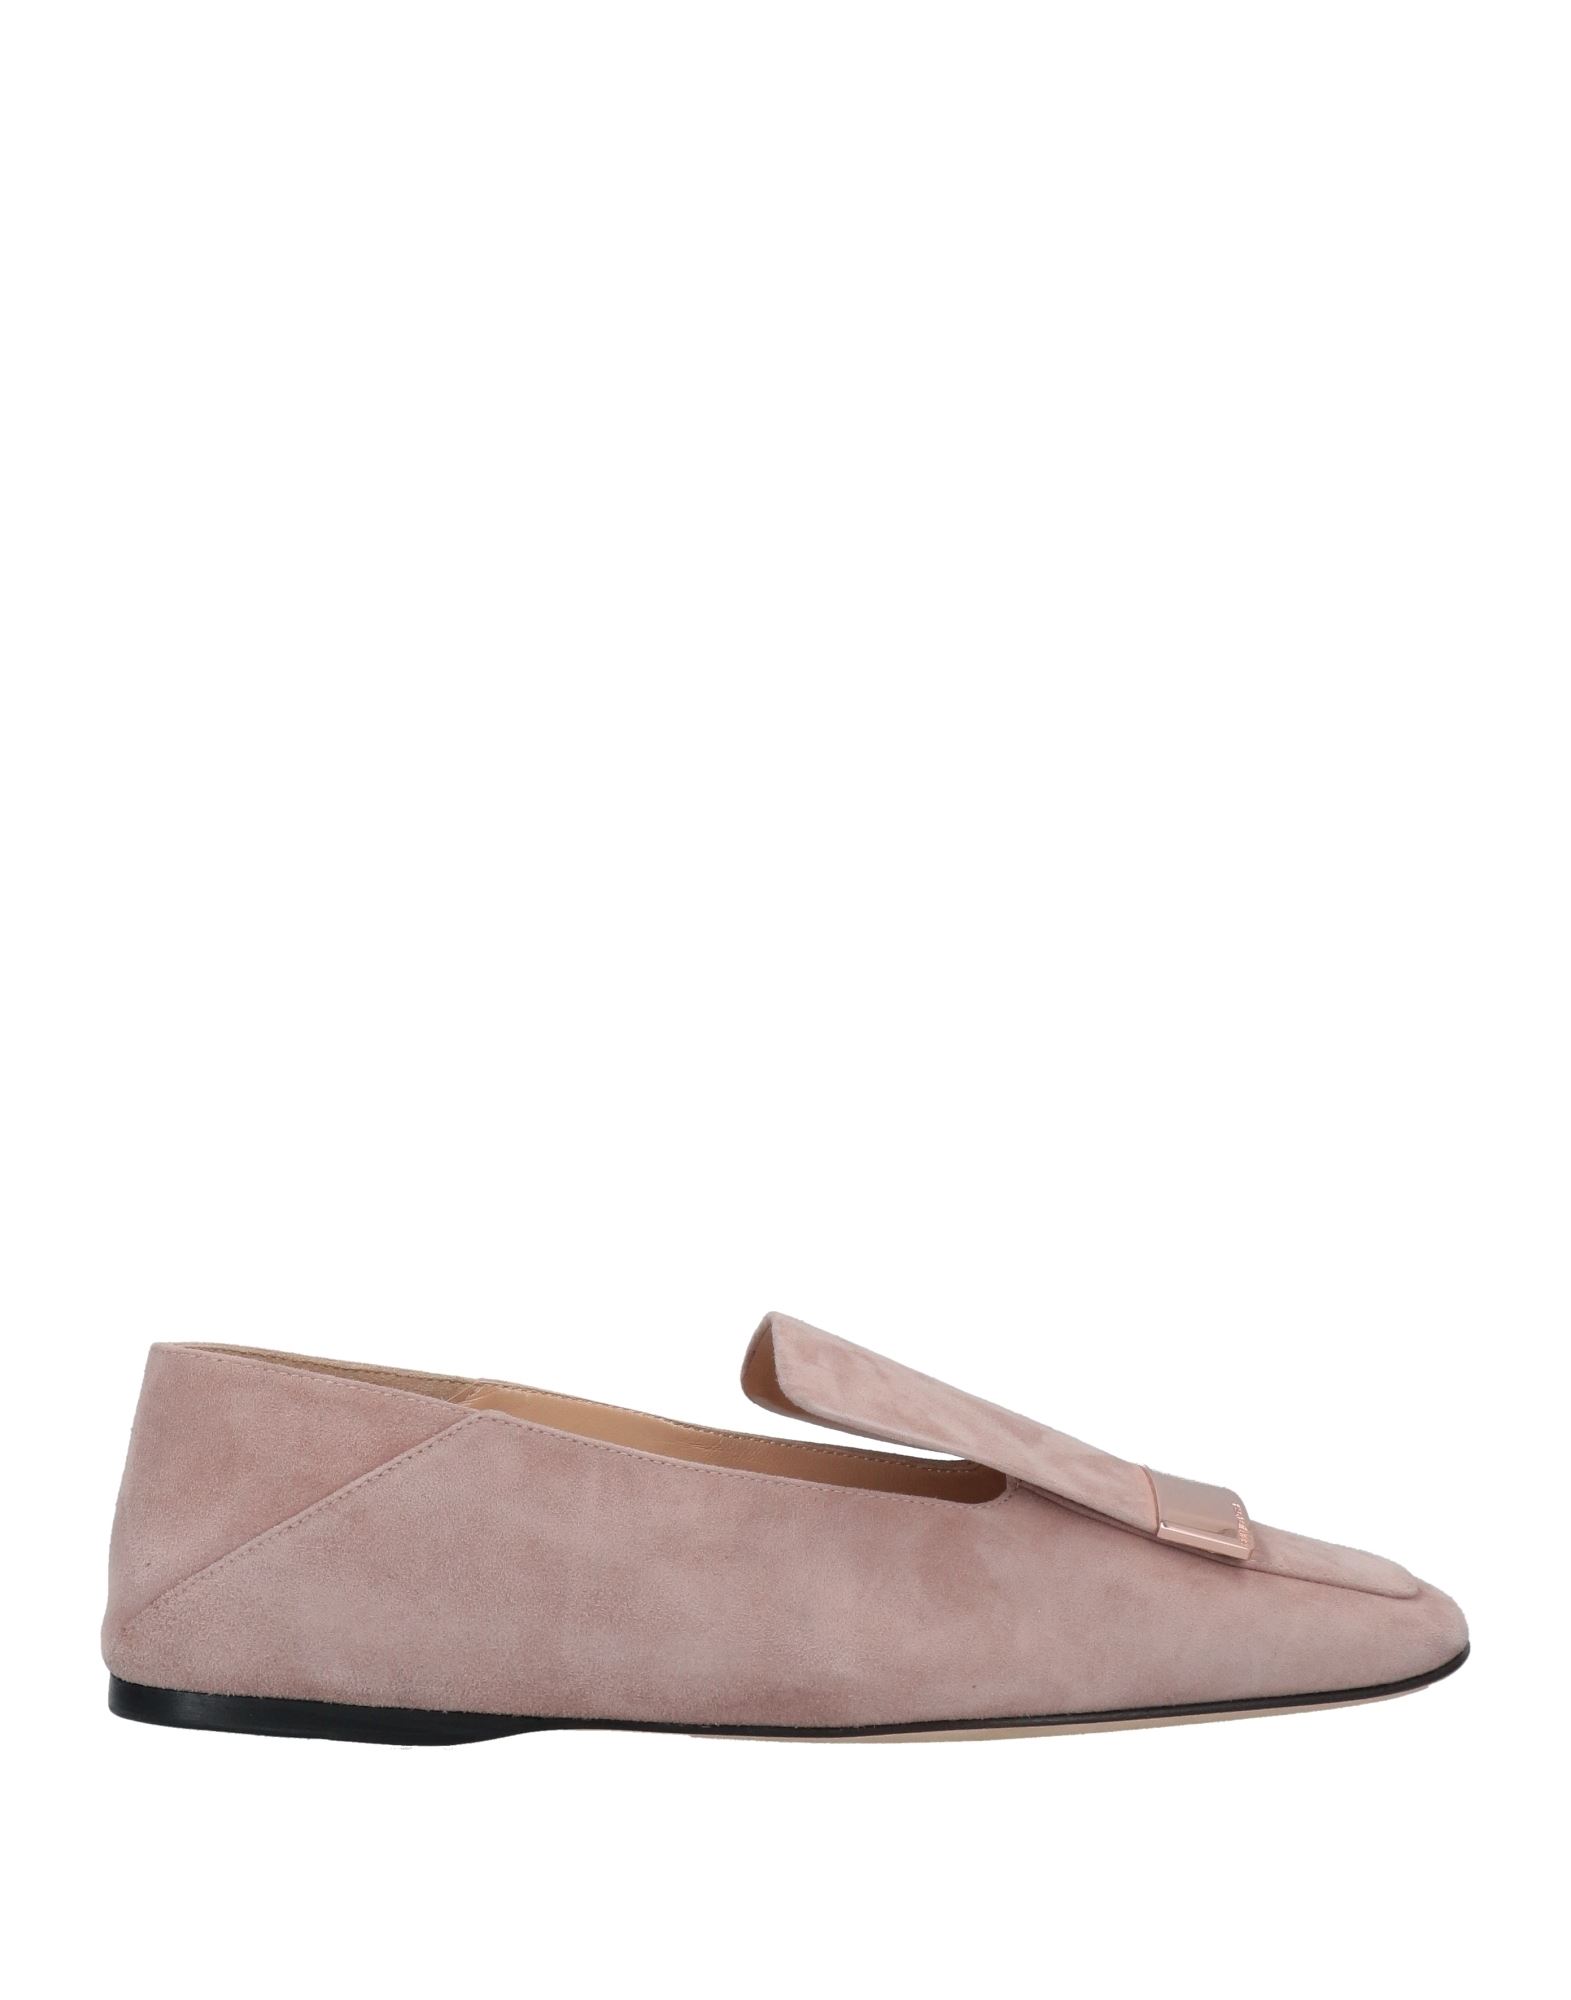 Sergio Rossi Loafers In Pastel Pink